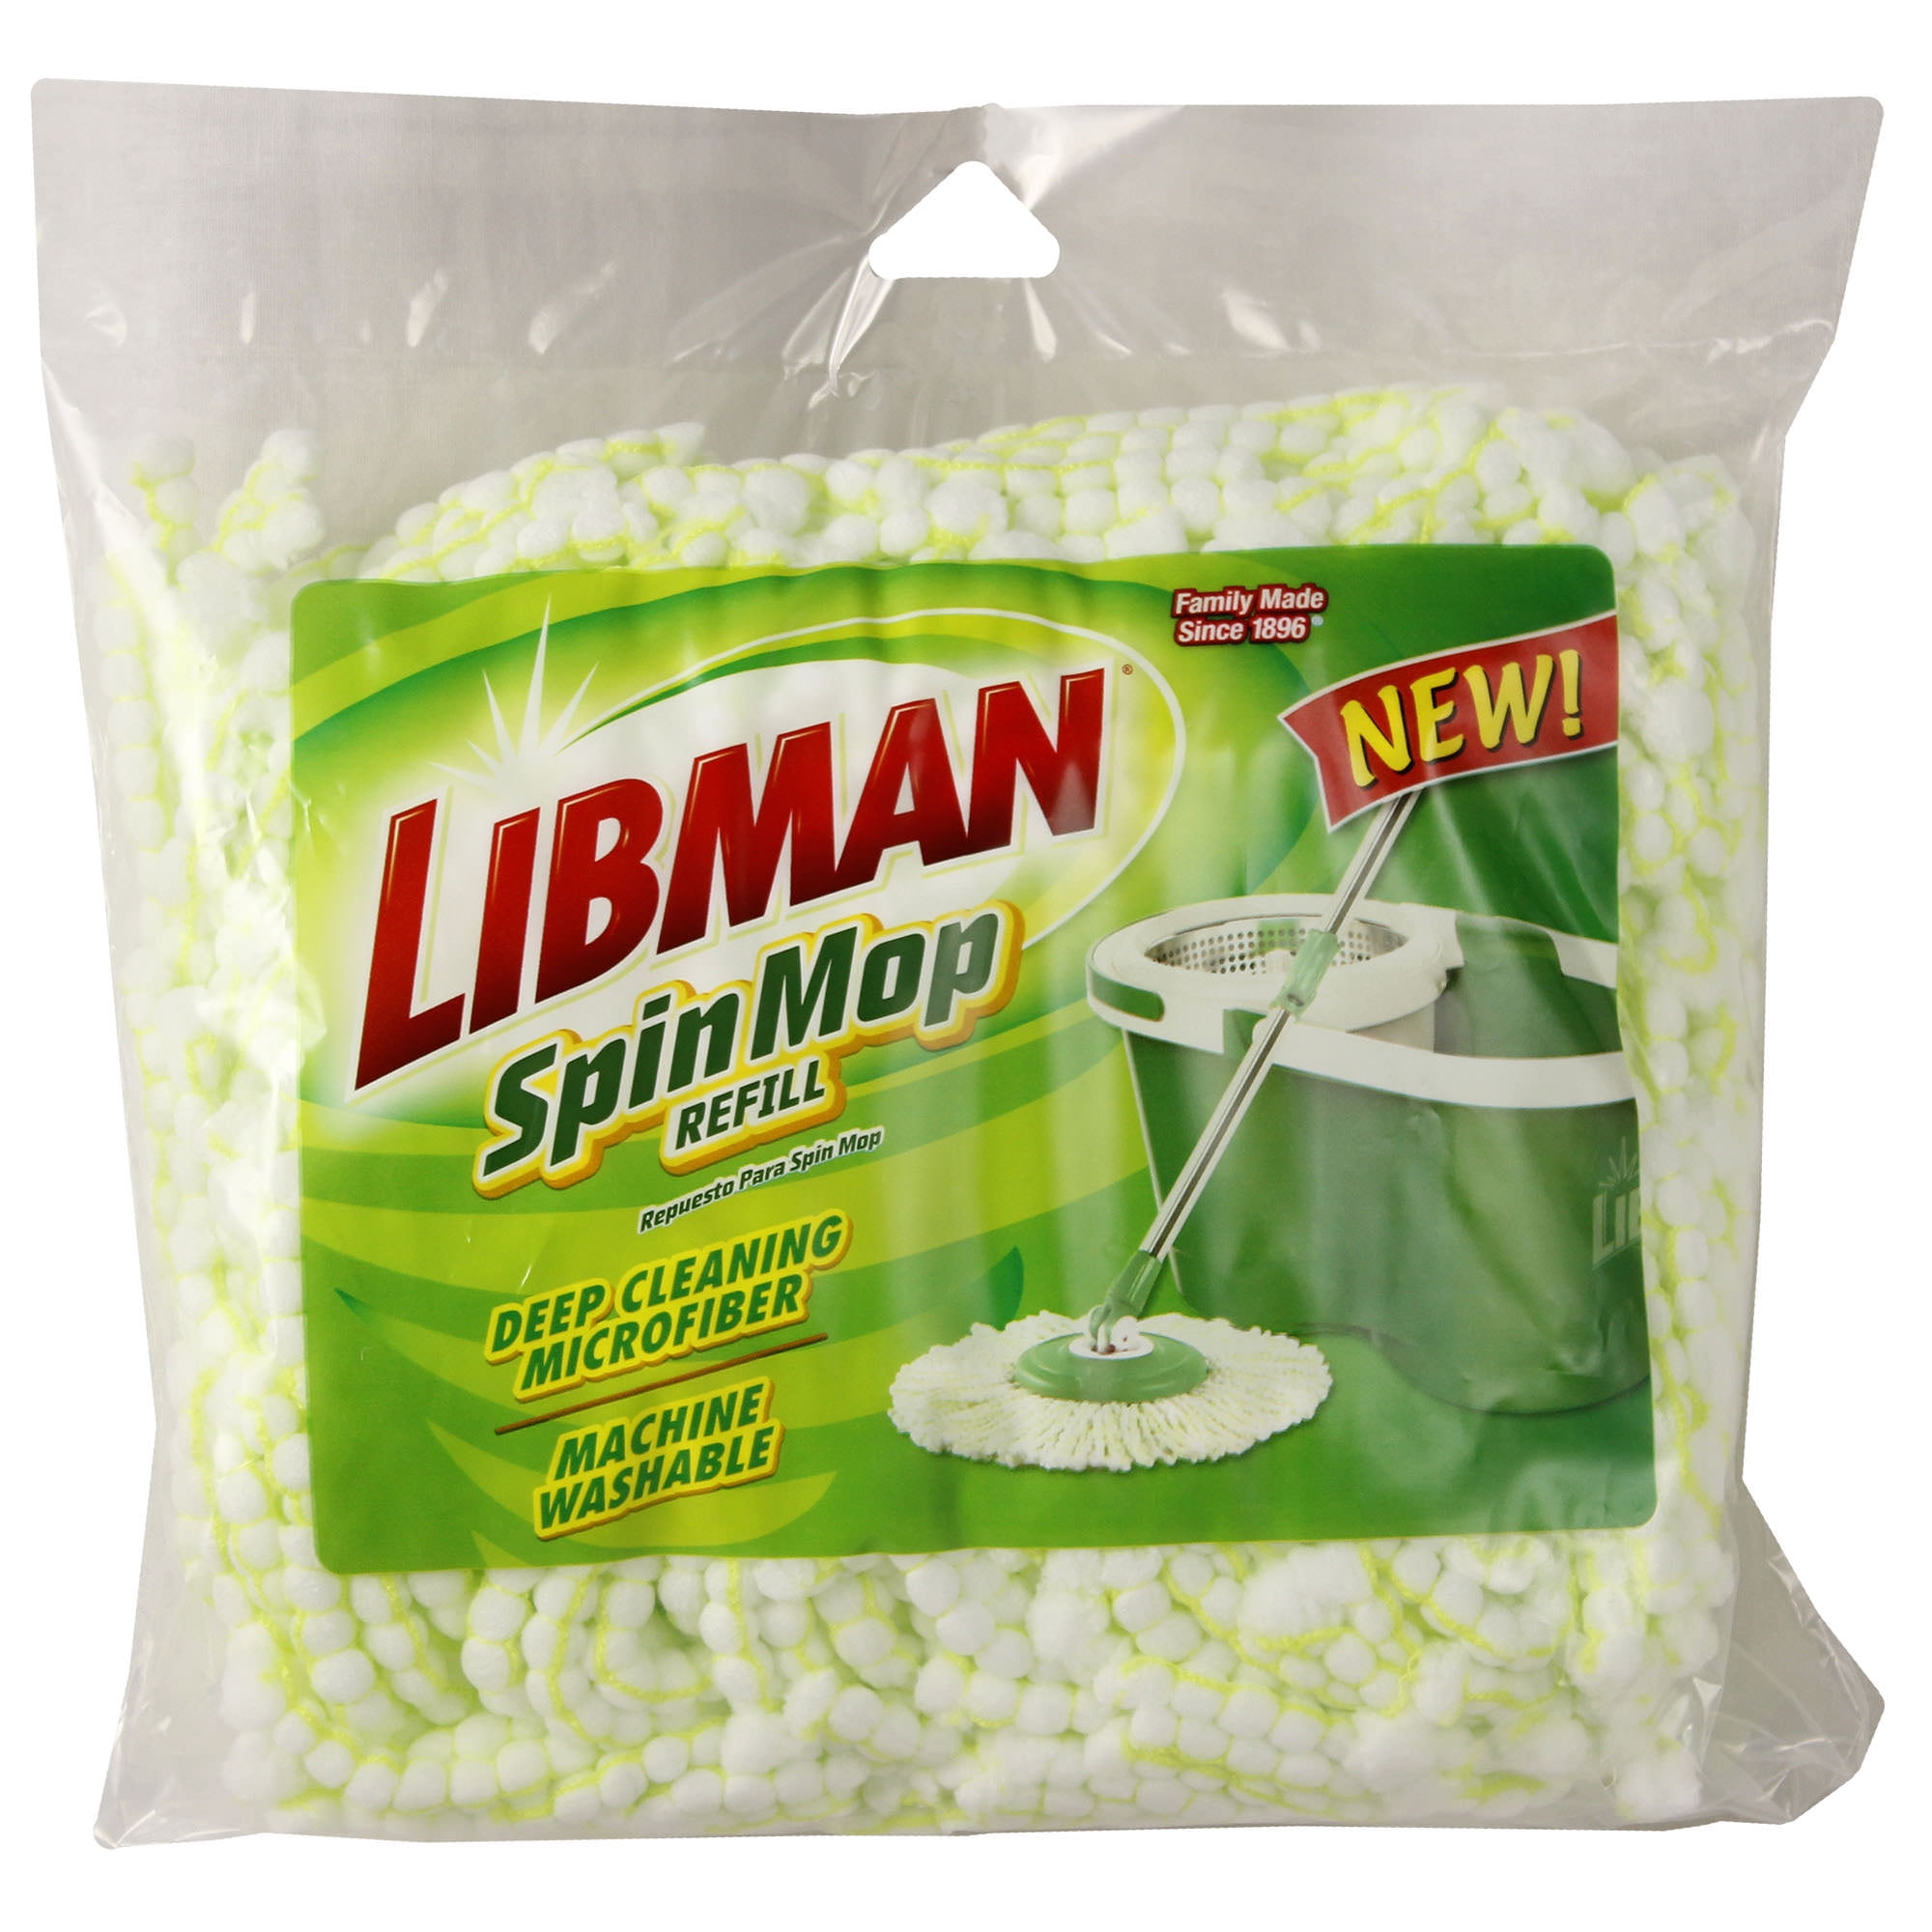 buy-libman-spin-mop-refill-online-at-lowest-price-in-india-234052177